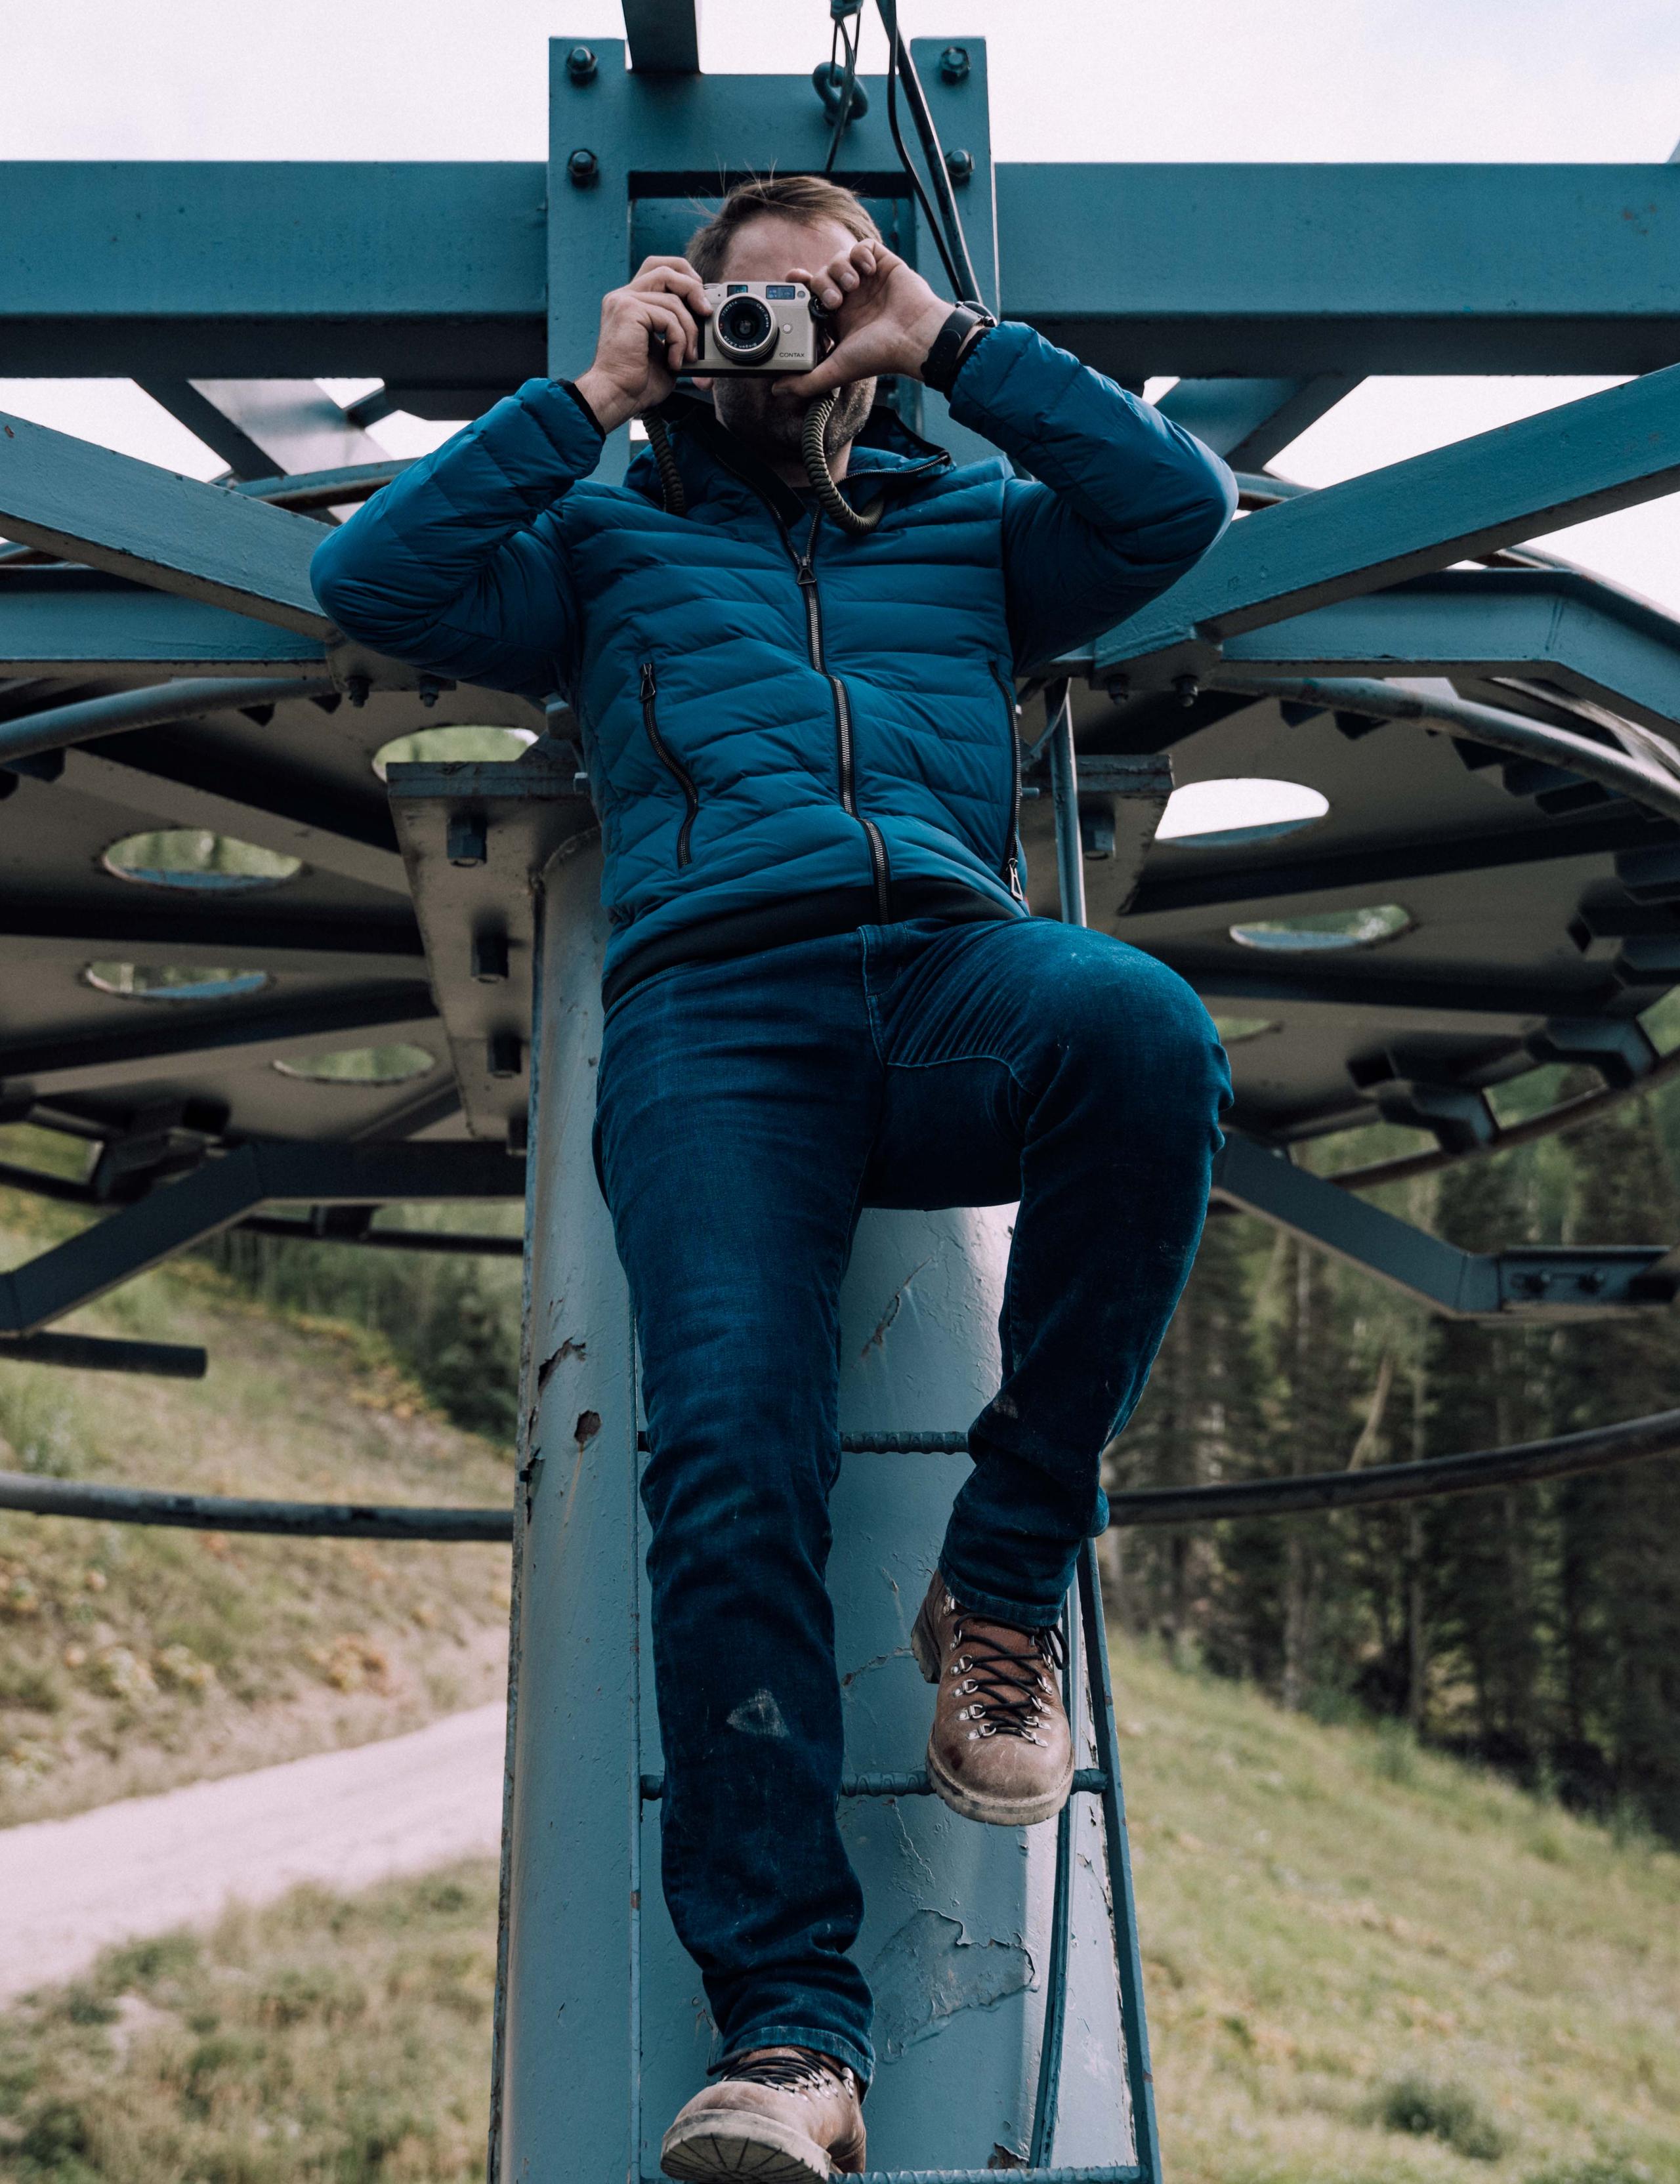 Man leaning on ski lift taking photo with point-and-shoot camera